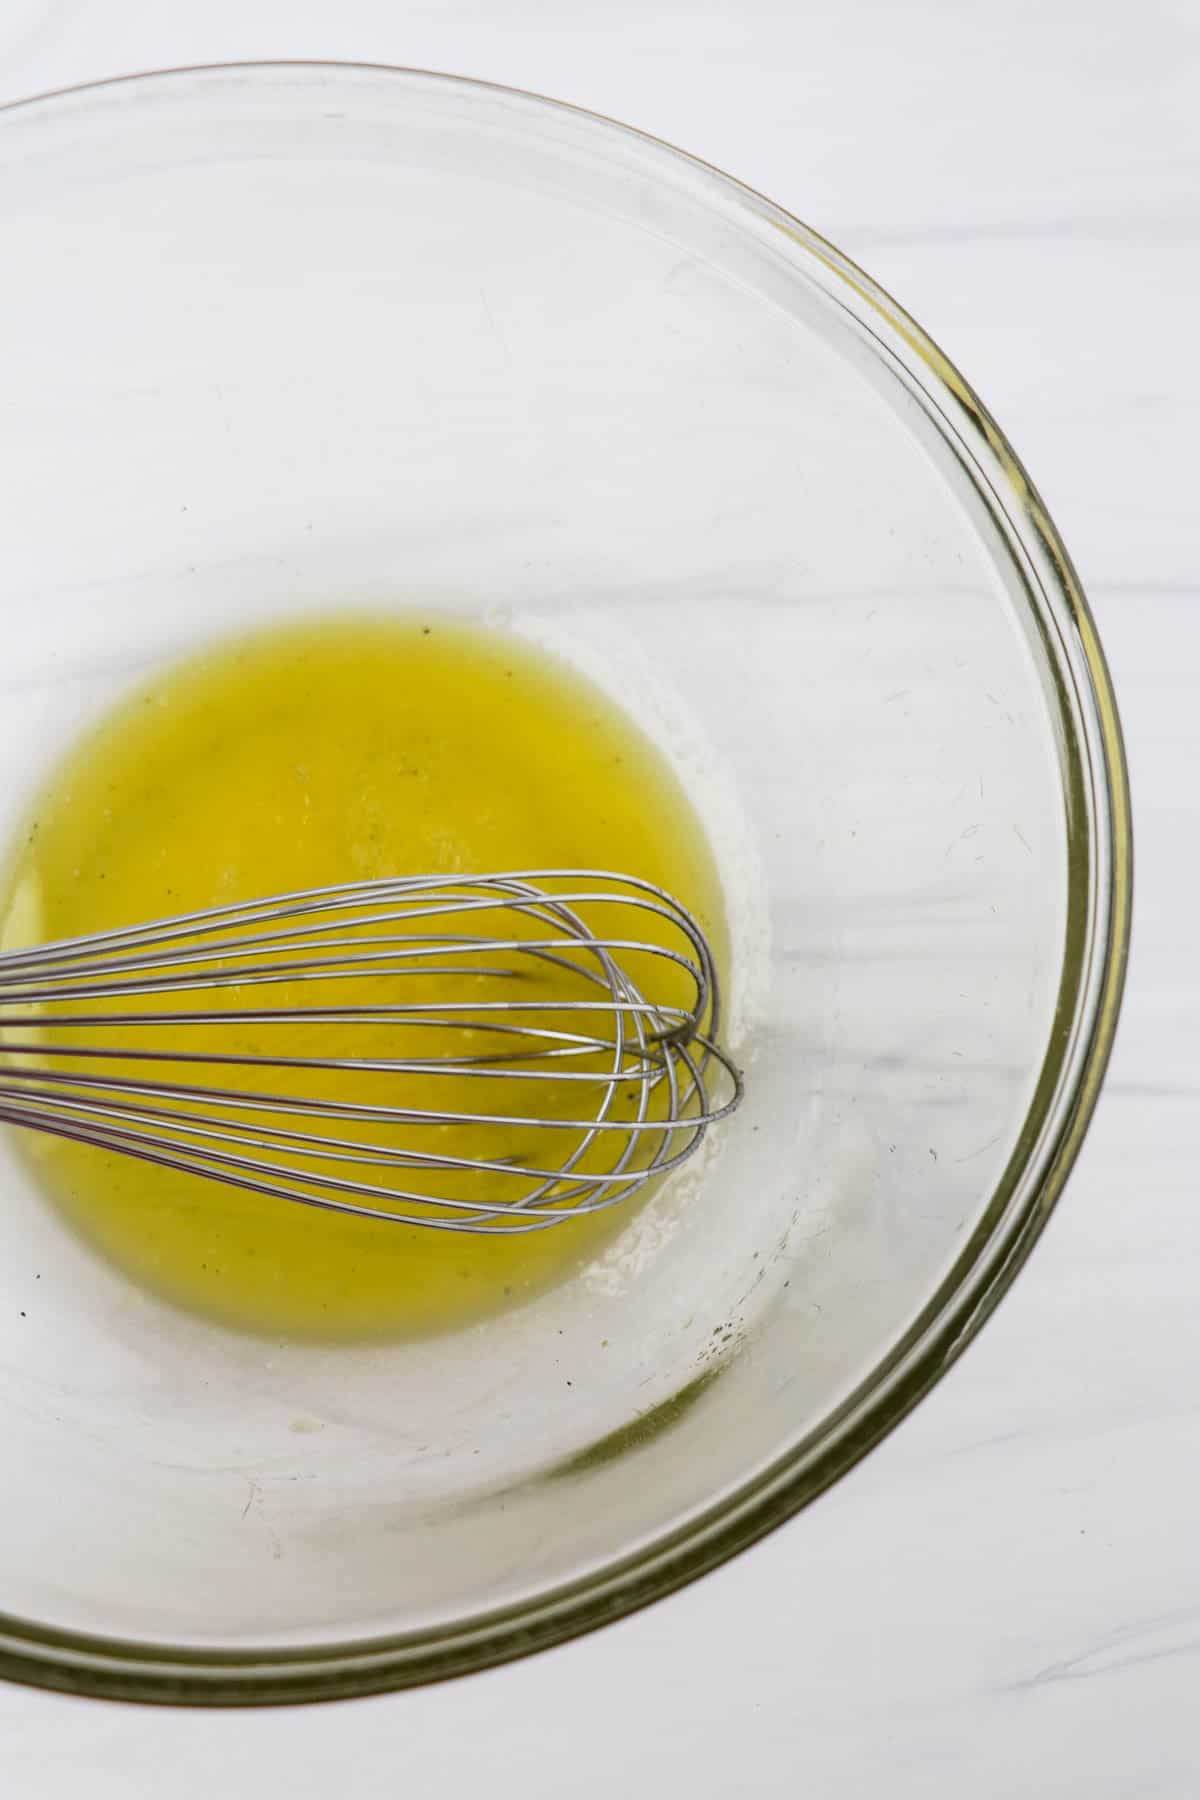 Vinaigrette in a glass bowl with a whisk.